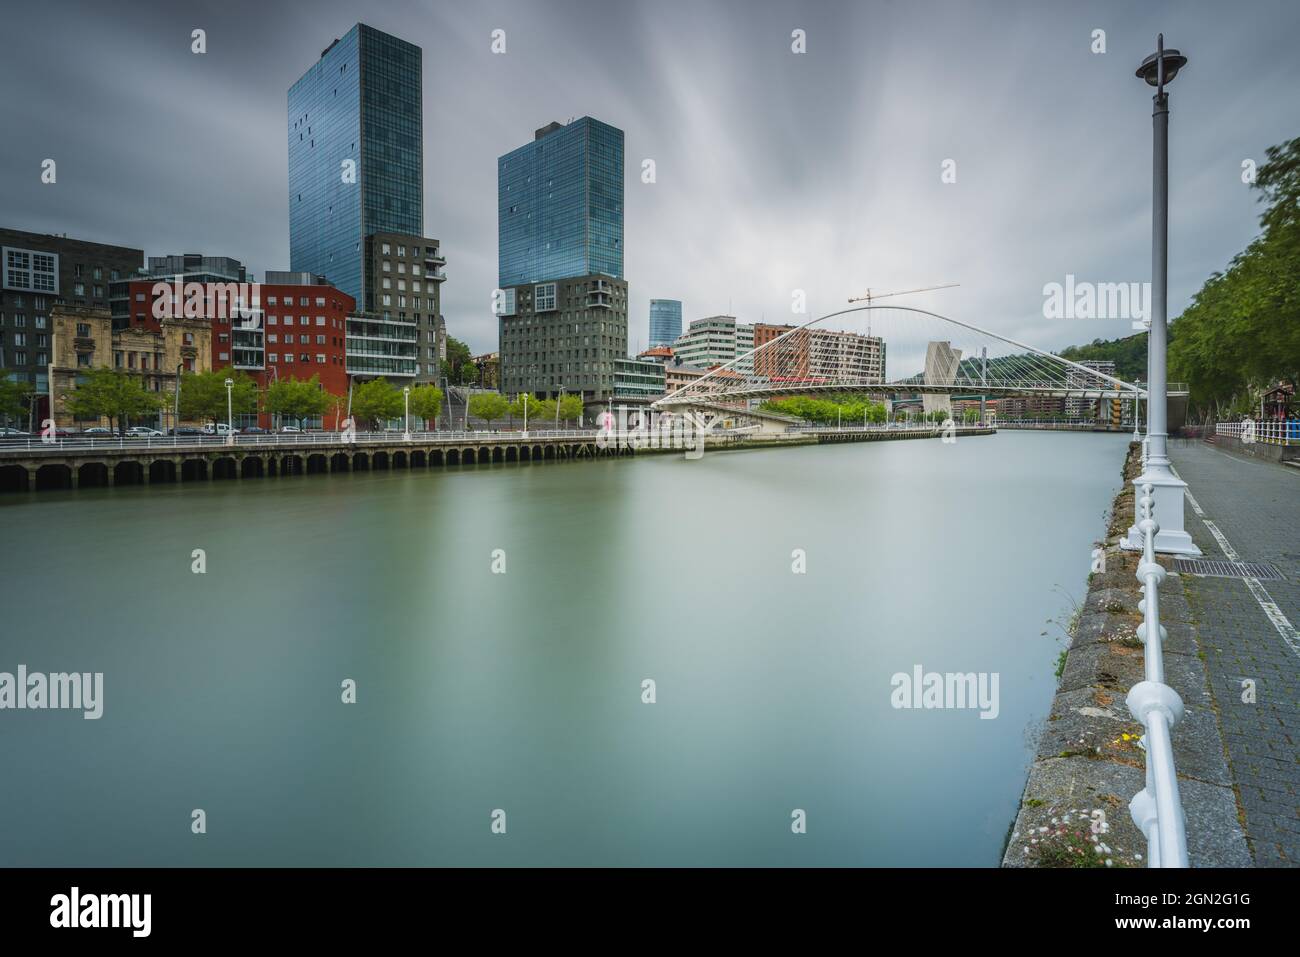 SPAIN, SPANISH BASQUE COUNTRY, BISCAY, BILBAO. VIEW OF THE TWIN TOWERS. THESE ARE THE TALLEST APARTMENT BUILDINGS IN THE BASQUE COUNTRY DESIGNED BY JA Stock Photo